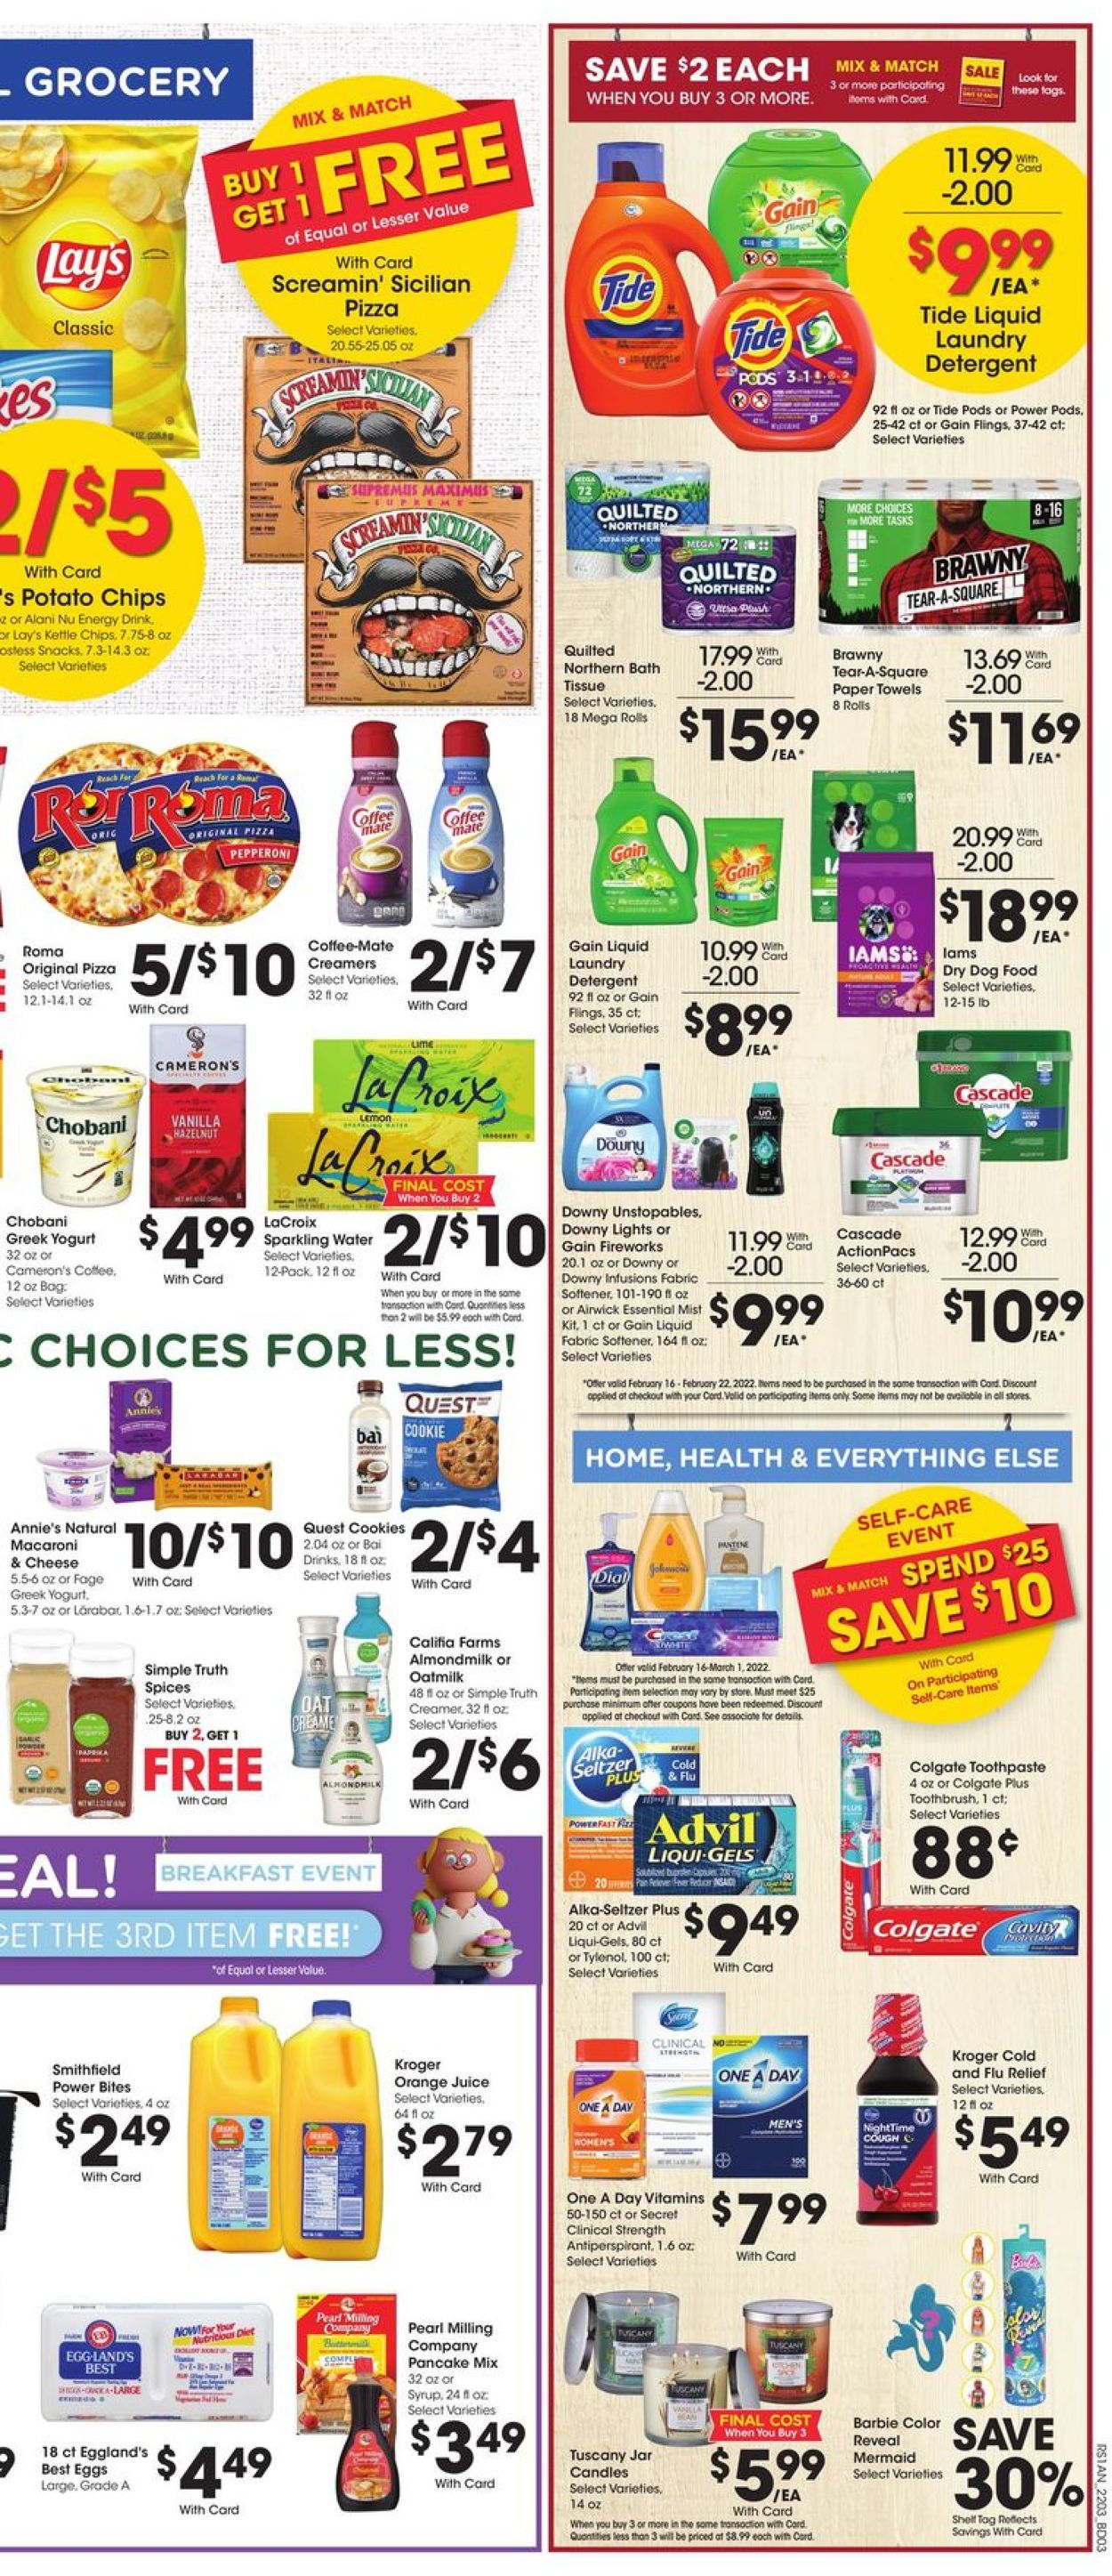 Catalogue Pick ‘n Save from 02/16/2022